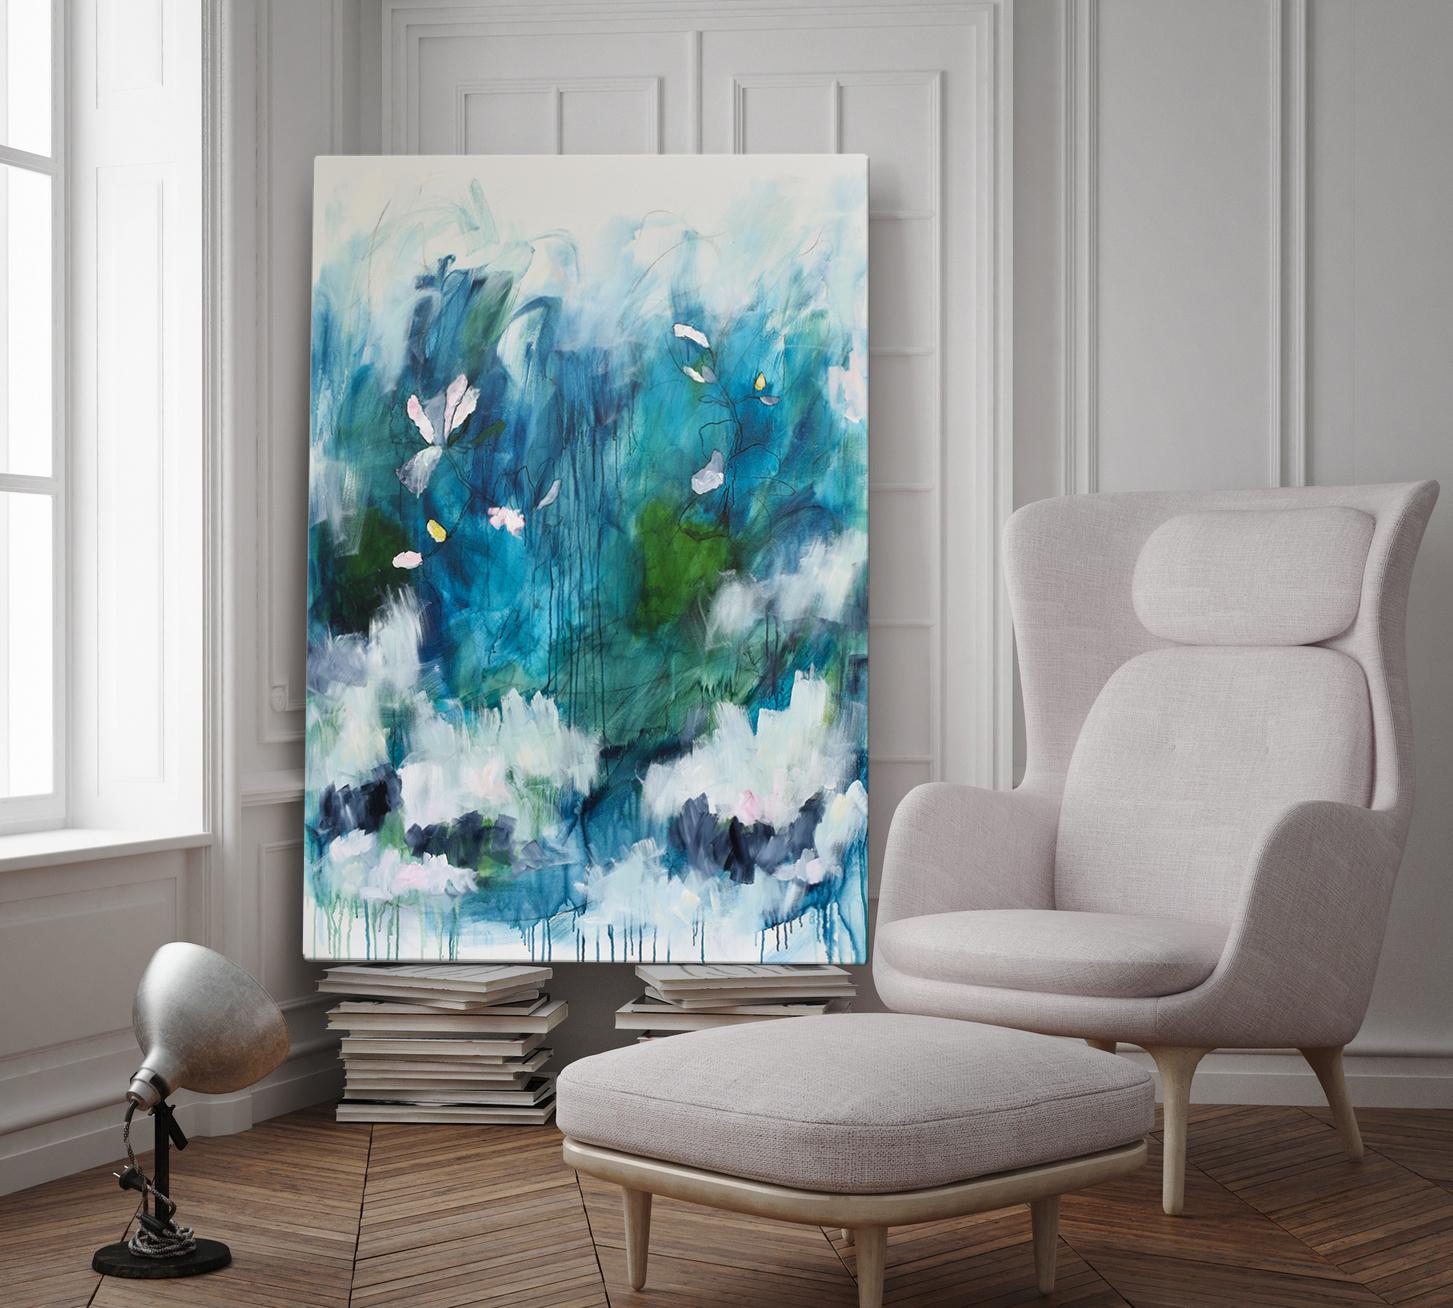 Pour Toujours - Forever (Abstract painting) - Painting by Julie Breton